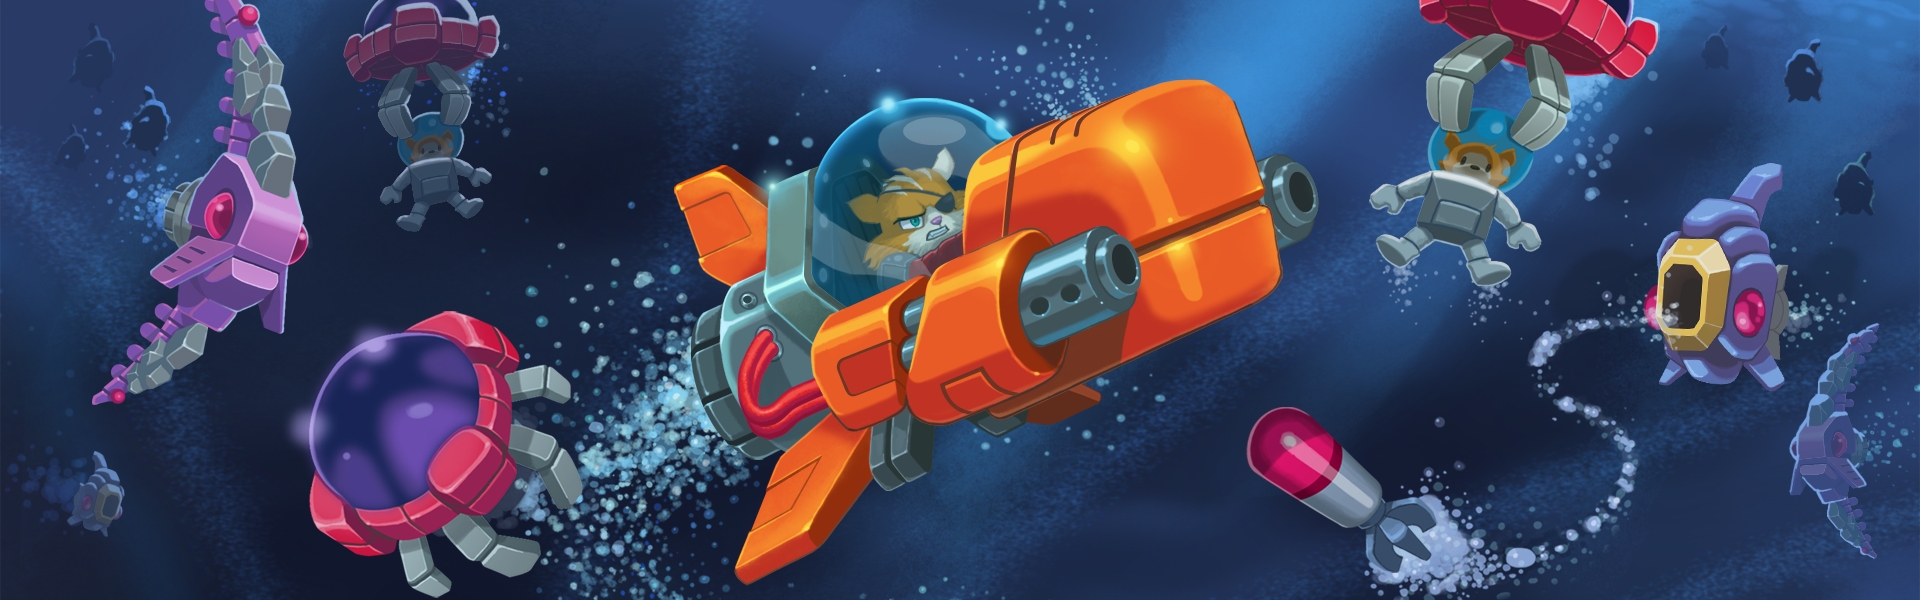 Yes, You Can Haz Aqua Kitty: Milk Mine Defender DX on PS4 and Vita